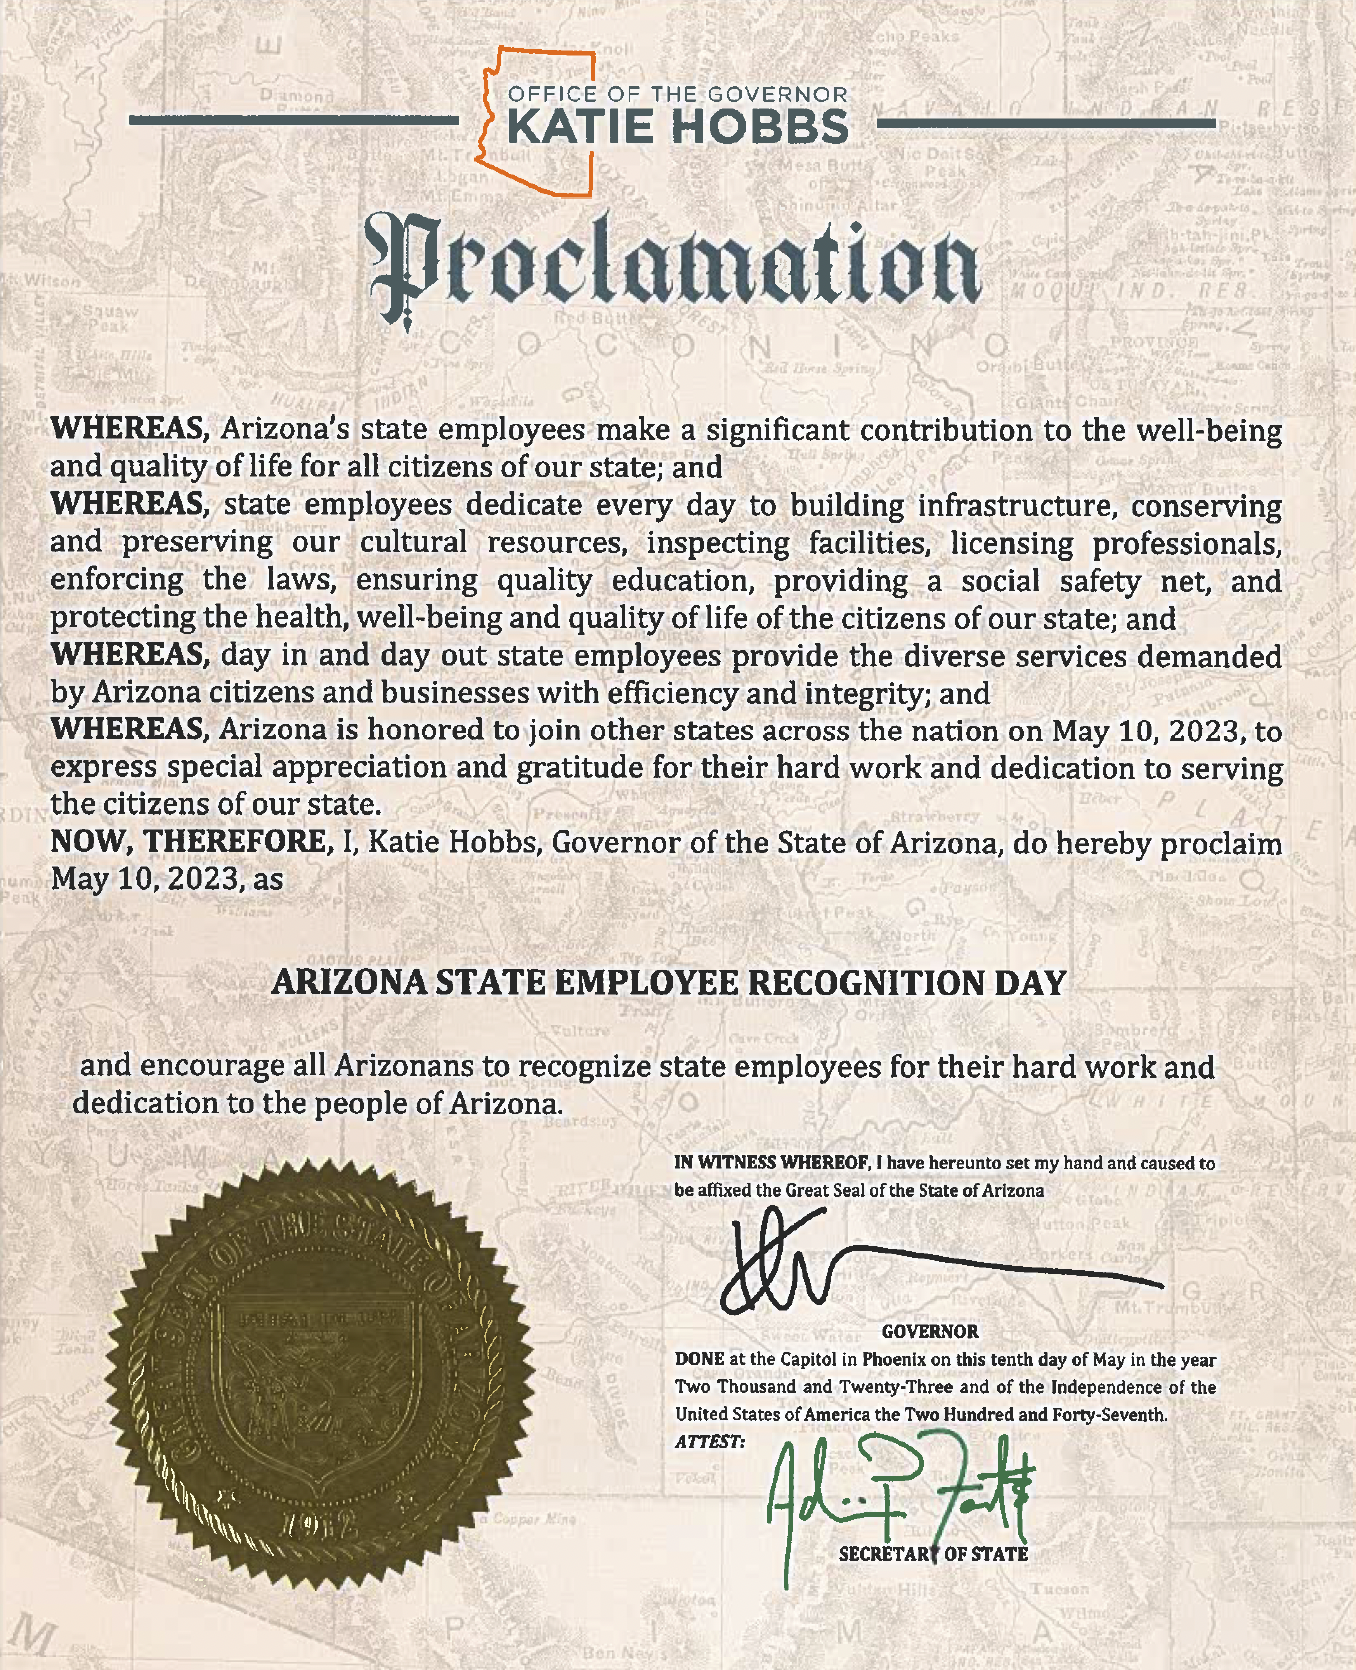 image of the 2023 Proclamation by Governor Hobbs for Employee Recognition Day